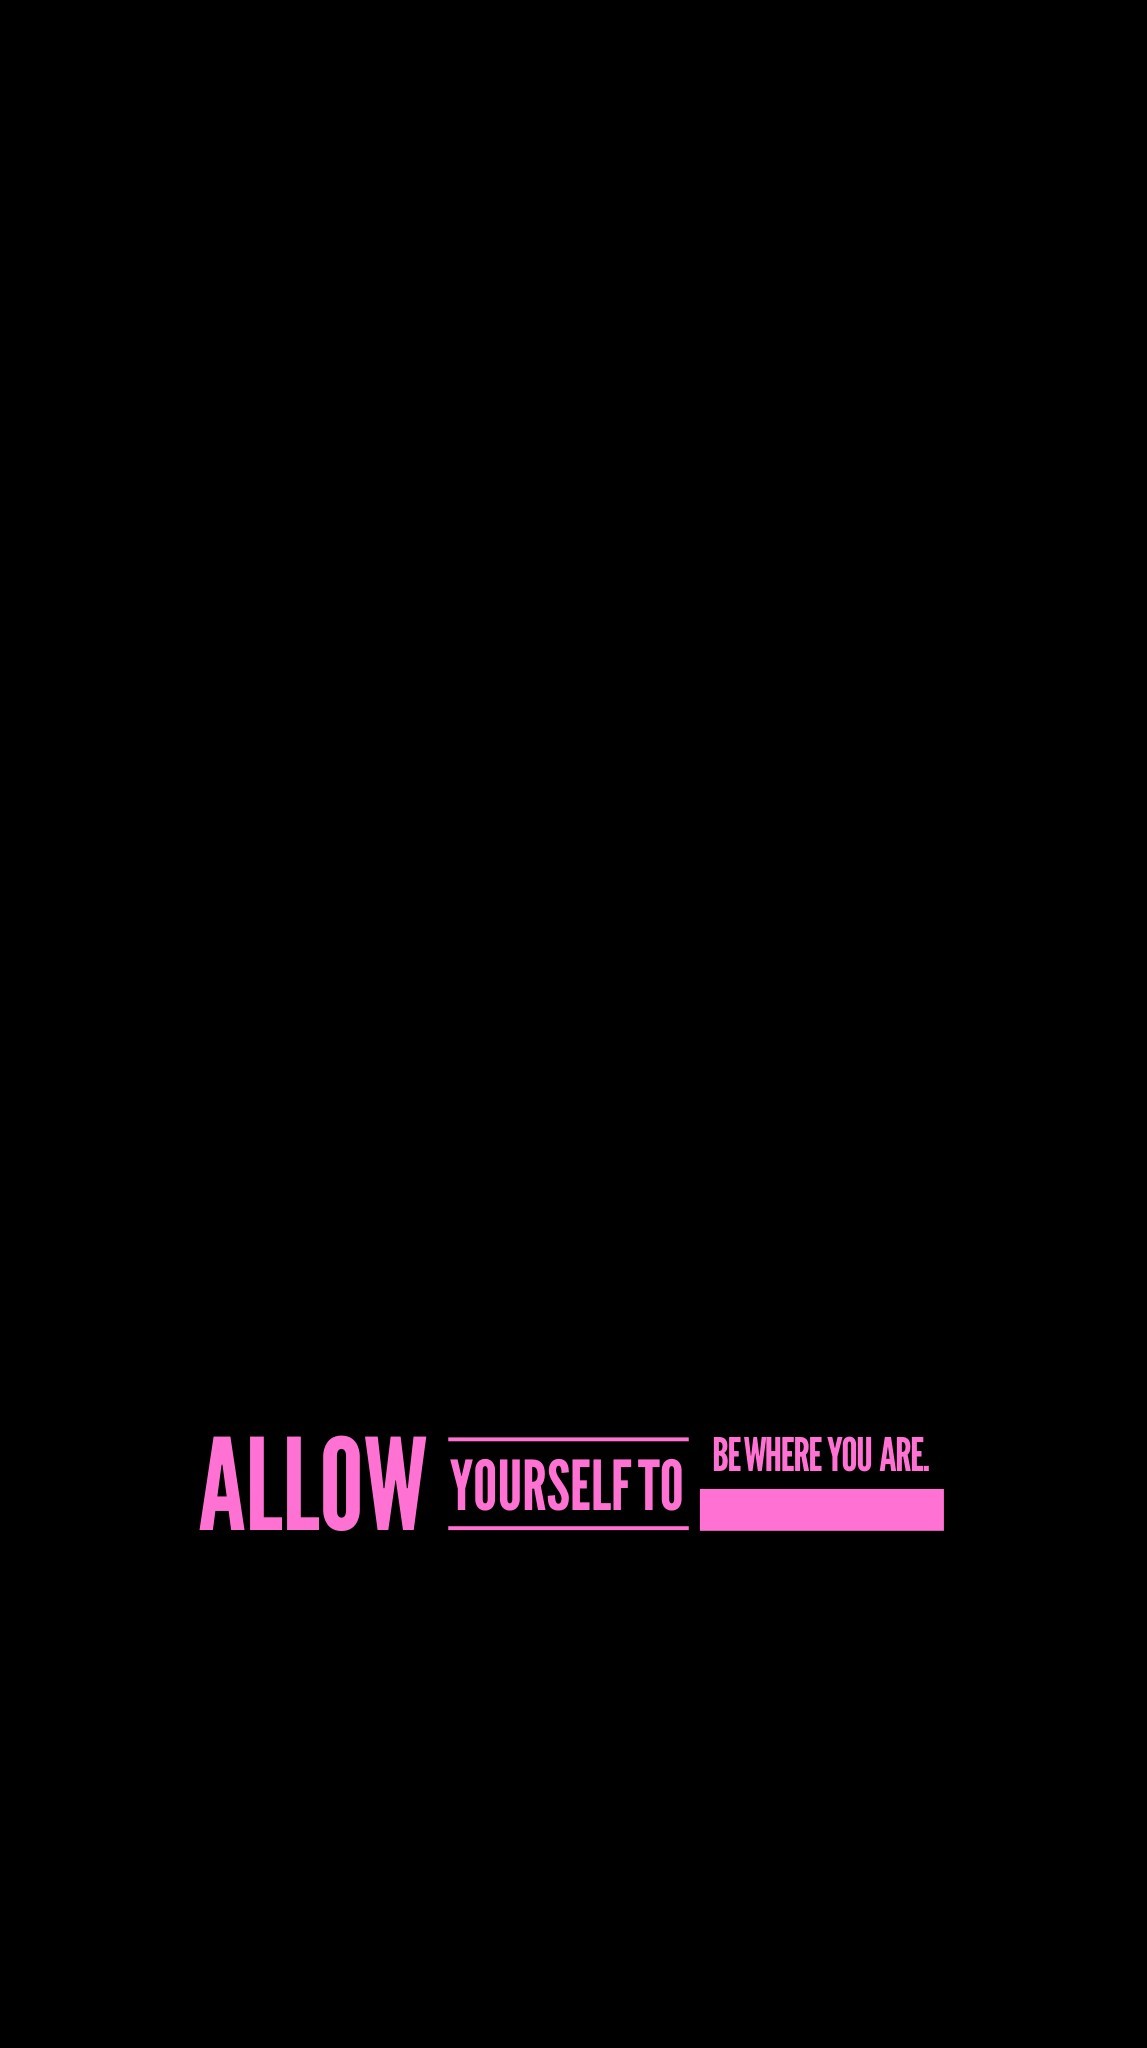 1147x2048 wallpaper, iPhone, Android, background, quote, simple, black, pink.  Background QuotesHello KittyAndroidSayings